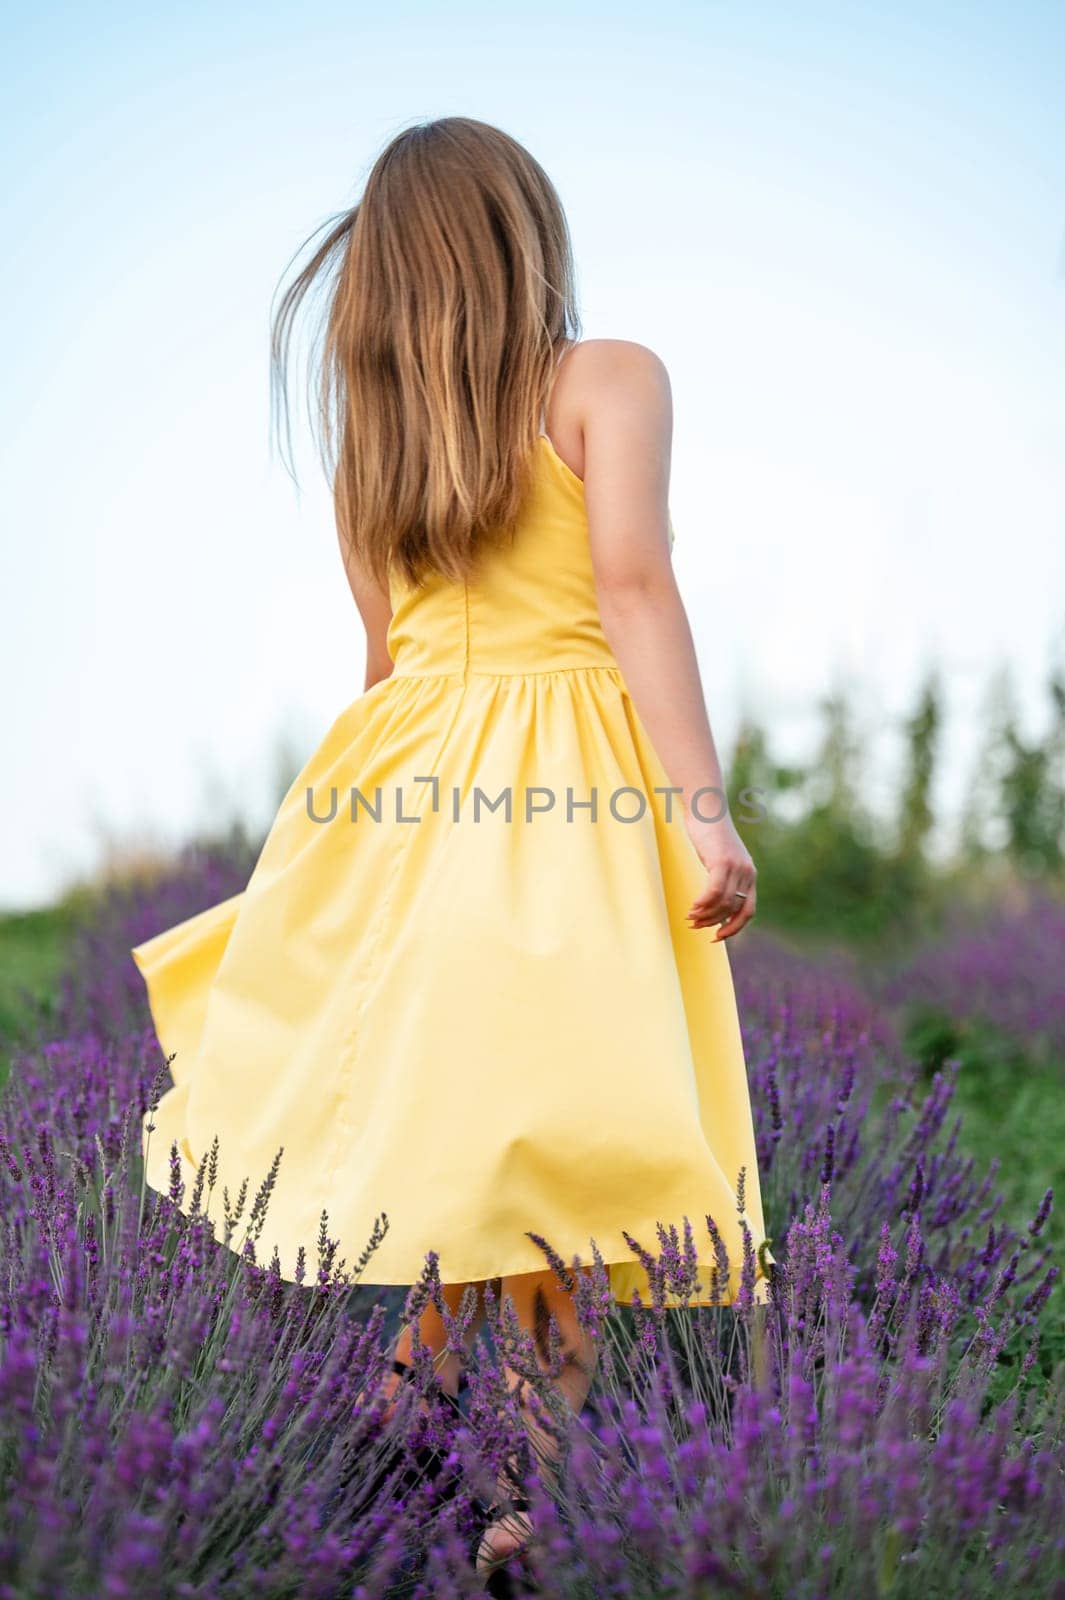 A young lavender field and a girl posing for a photo, young lavender field.